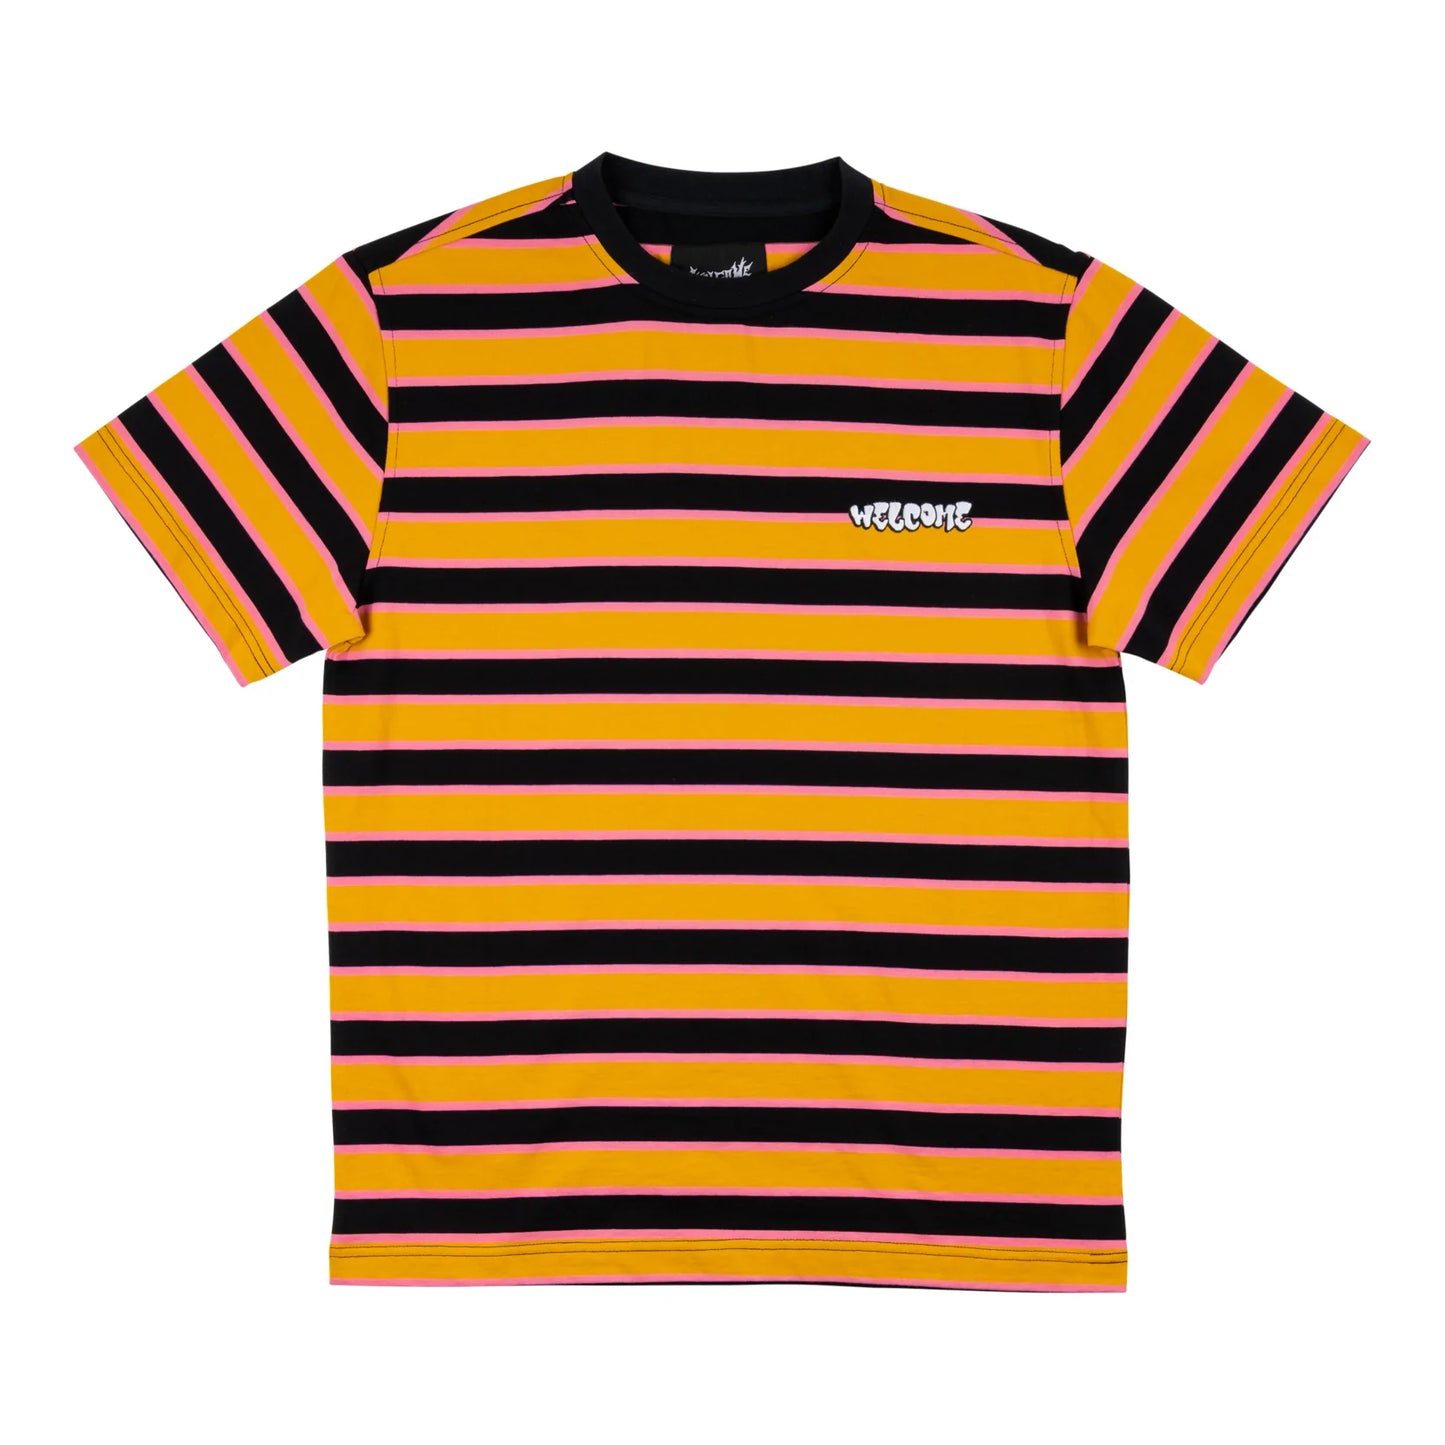 Welcome Skateboards - Cooper Striped Yarn-Dyed Knit Shirt